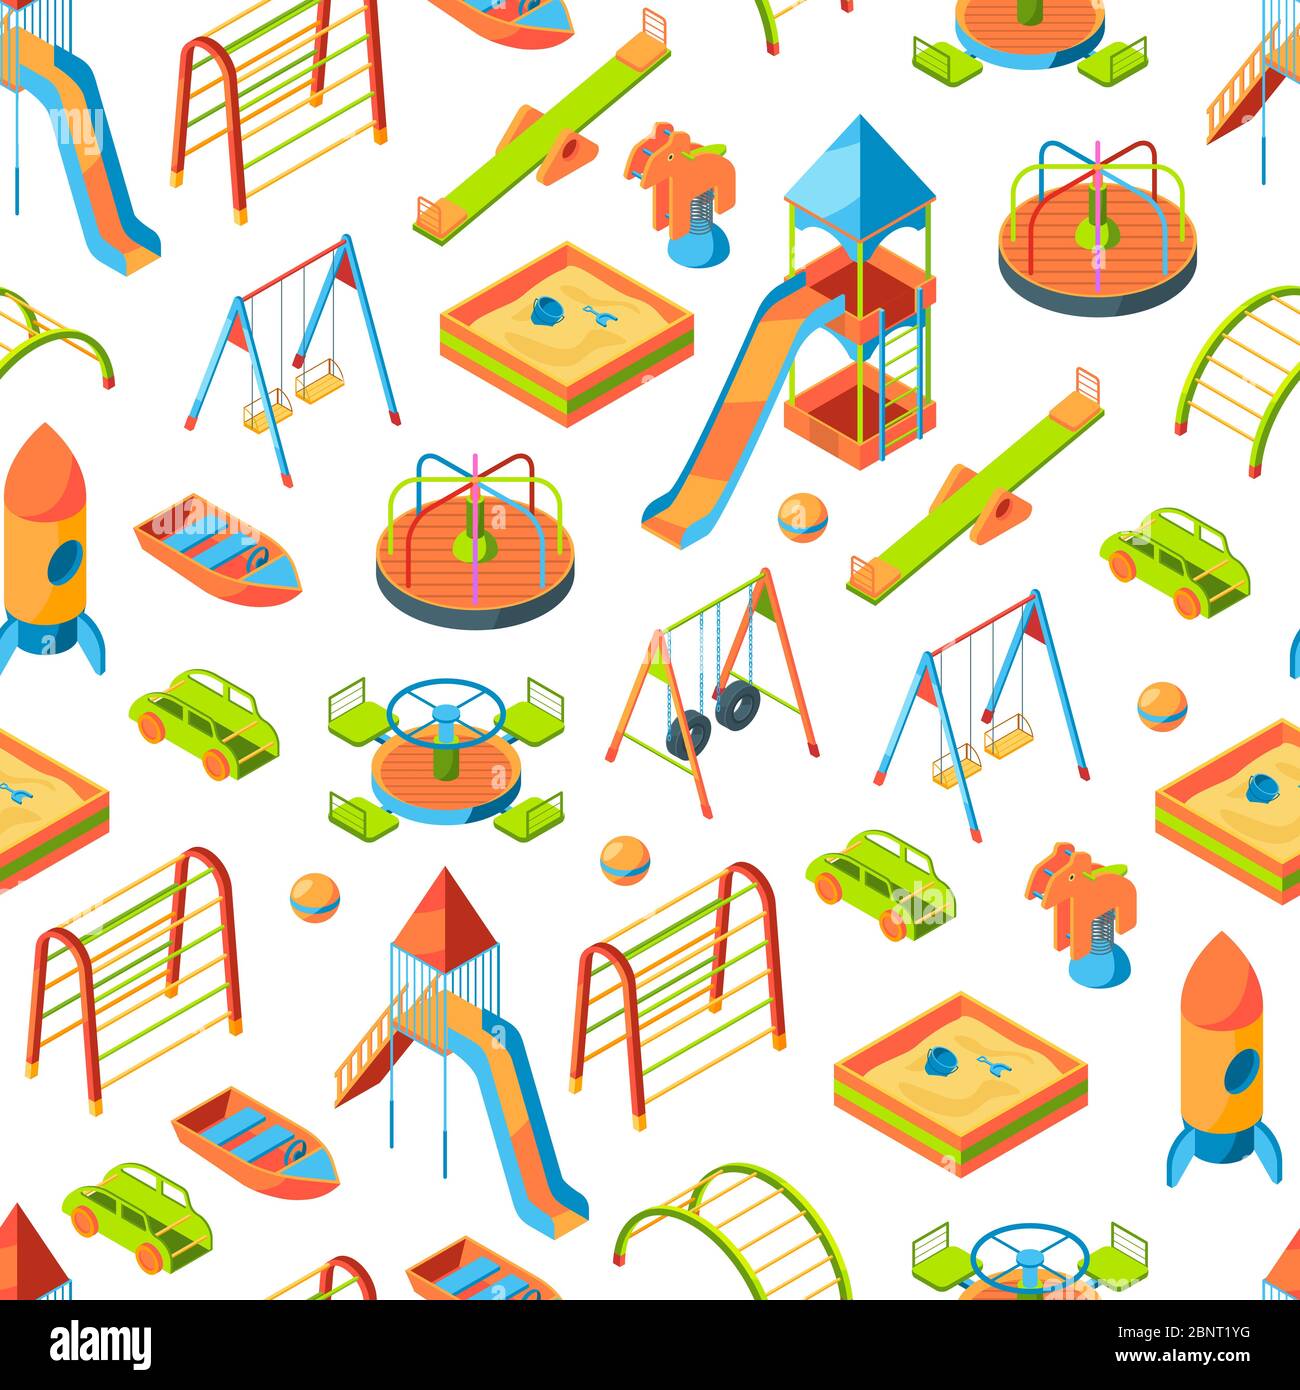 Vector isometric playground objects background or pattern illustration Stock Vector